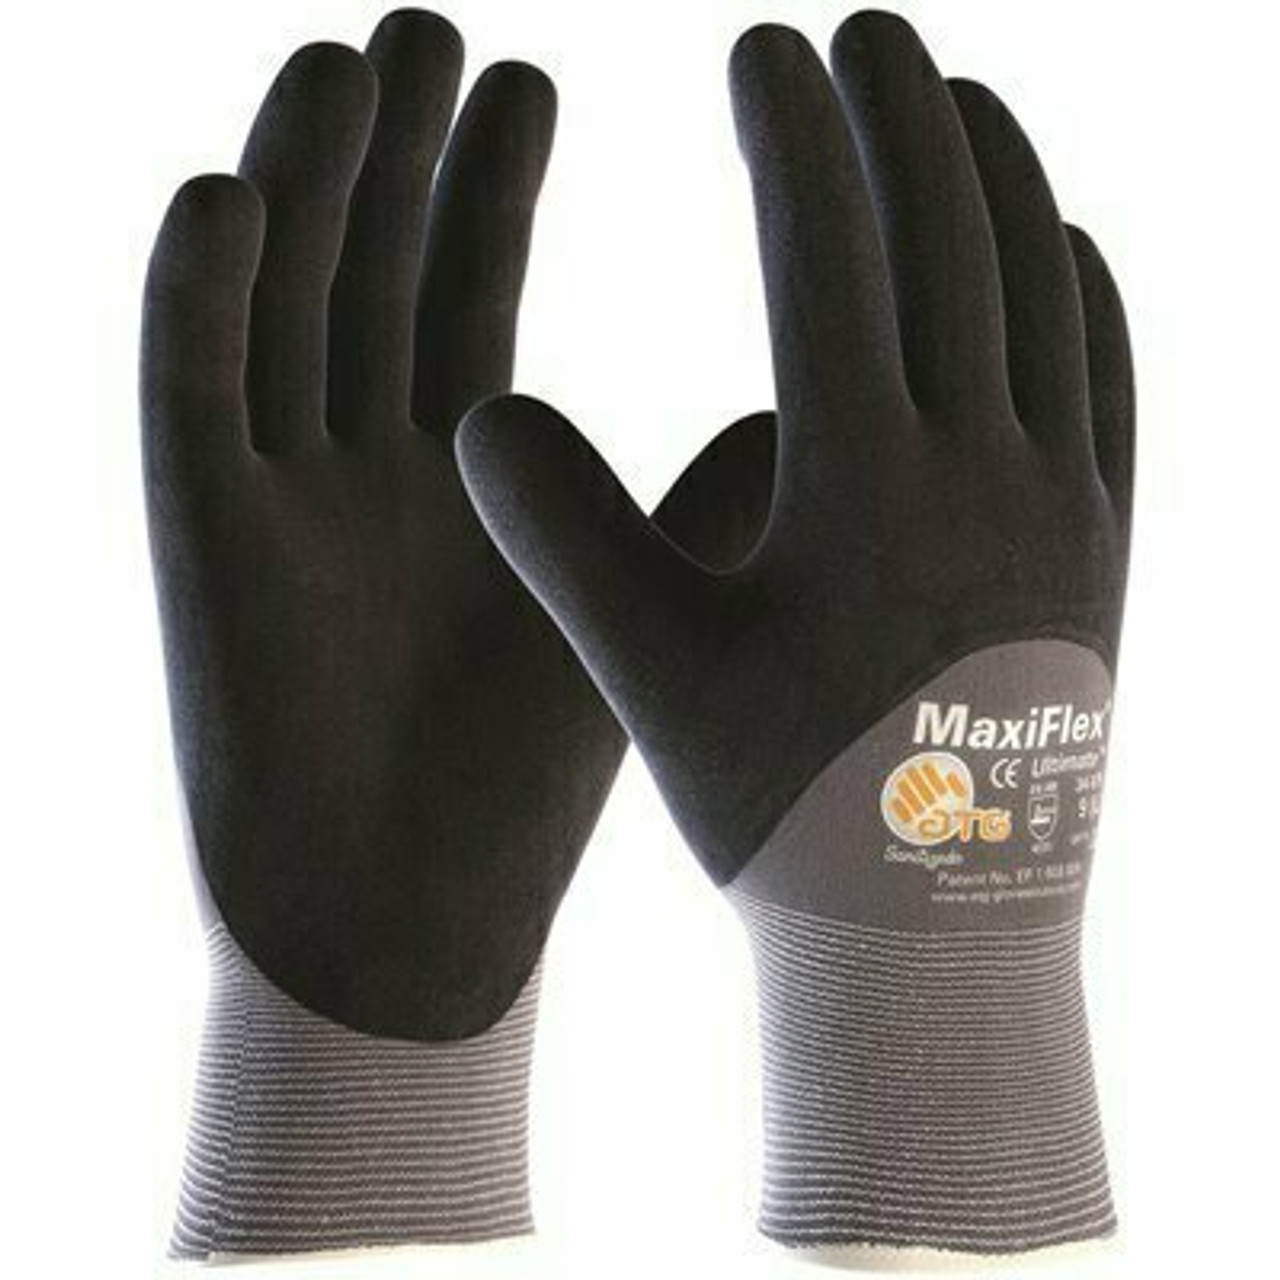 Small Seamless Knits For General Duty By Atg Gloves (1 Dozen Pairs)